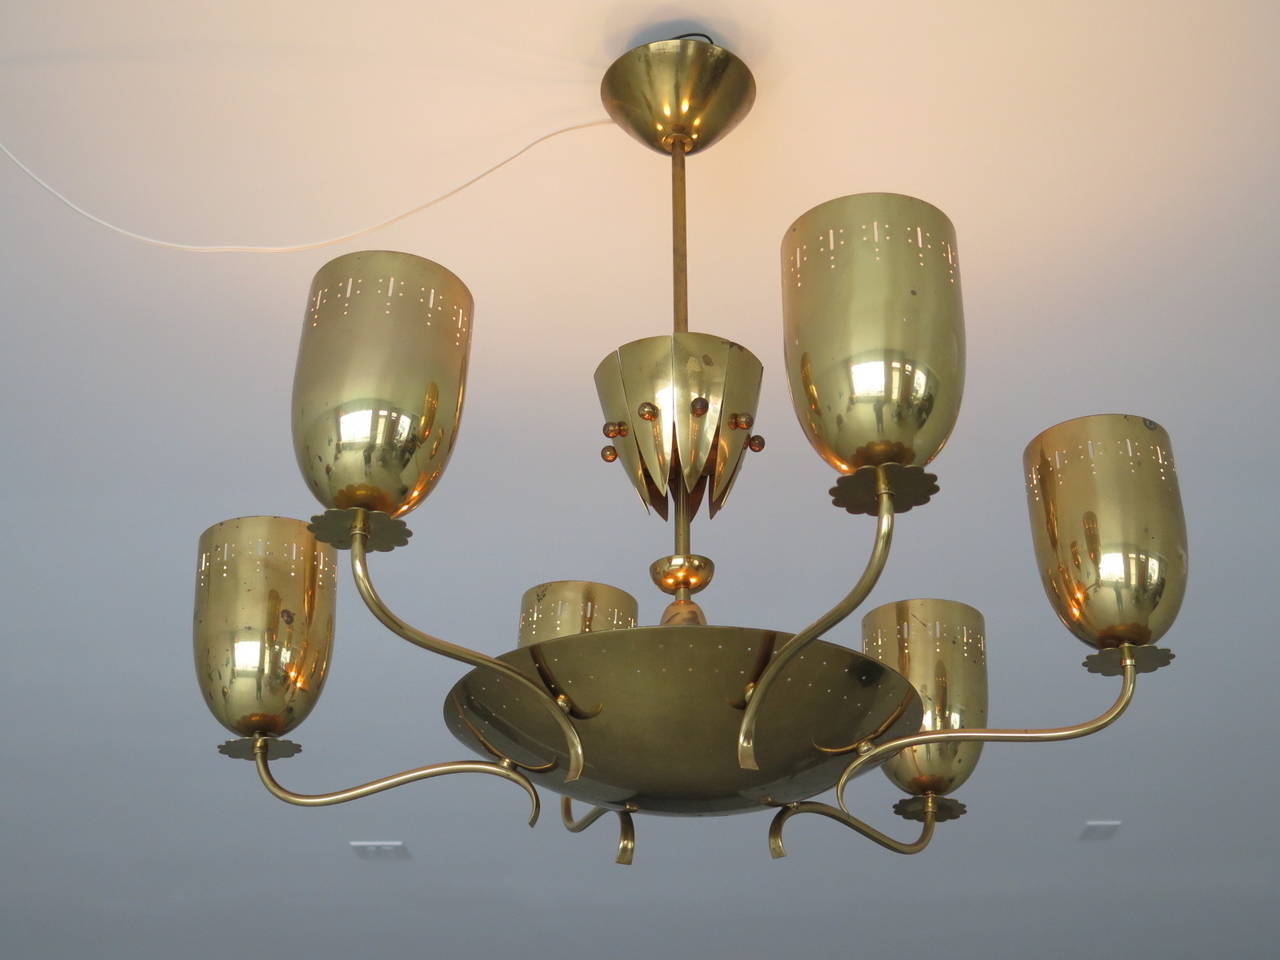 Mid-Century Modern Large German Chandelier in Polished Brass, circa 1950s For Sale